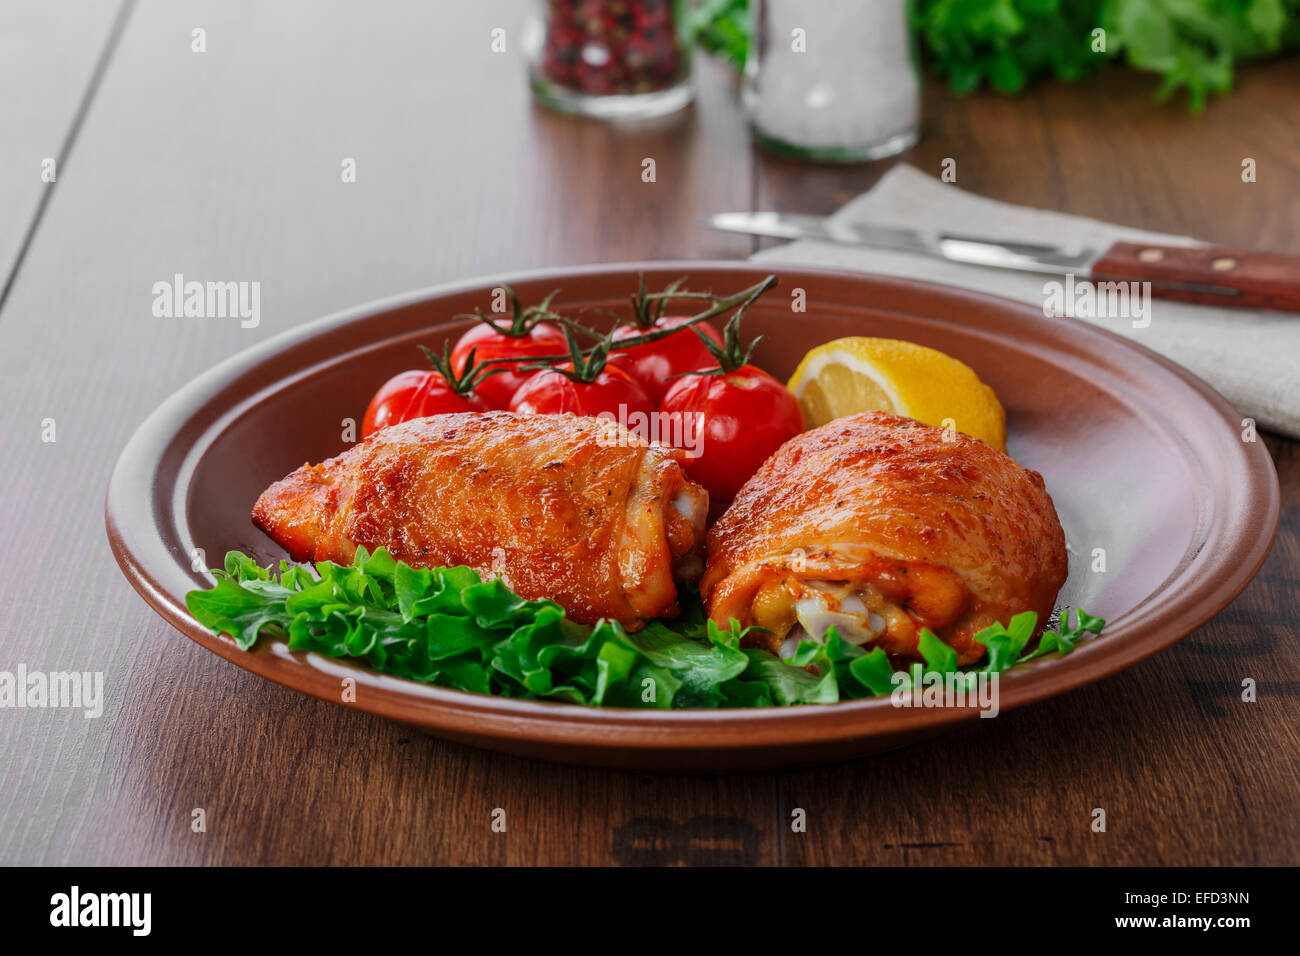 baked chicken thigh with cherry tomatoes and lemon Stock Photo